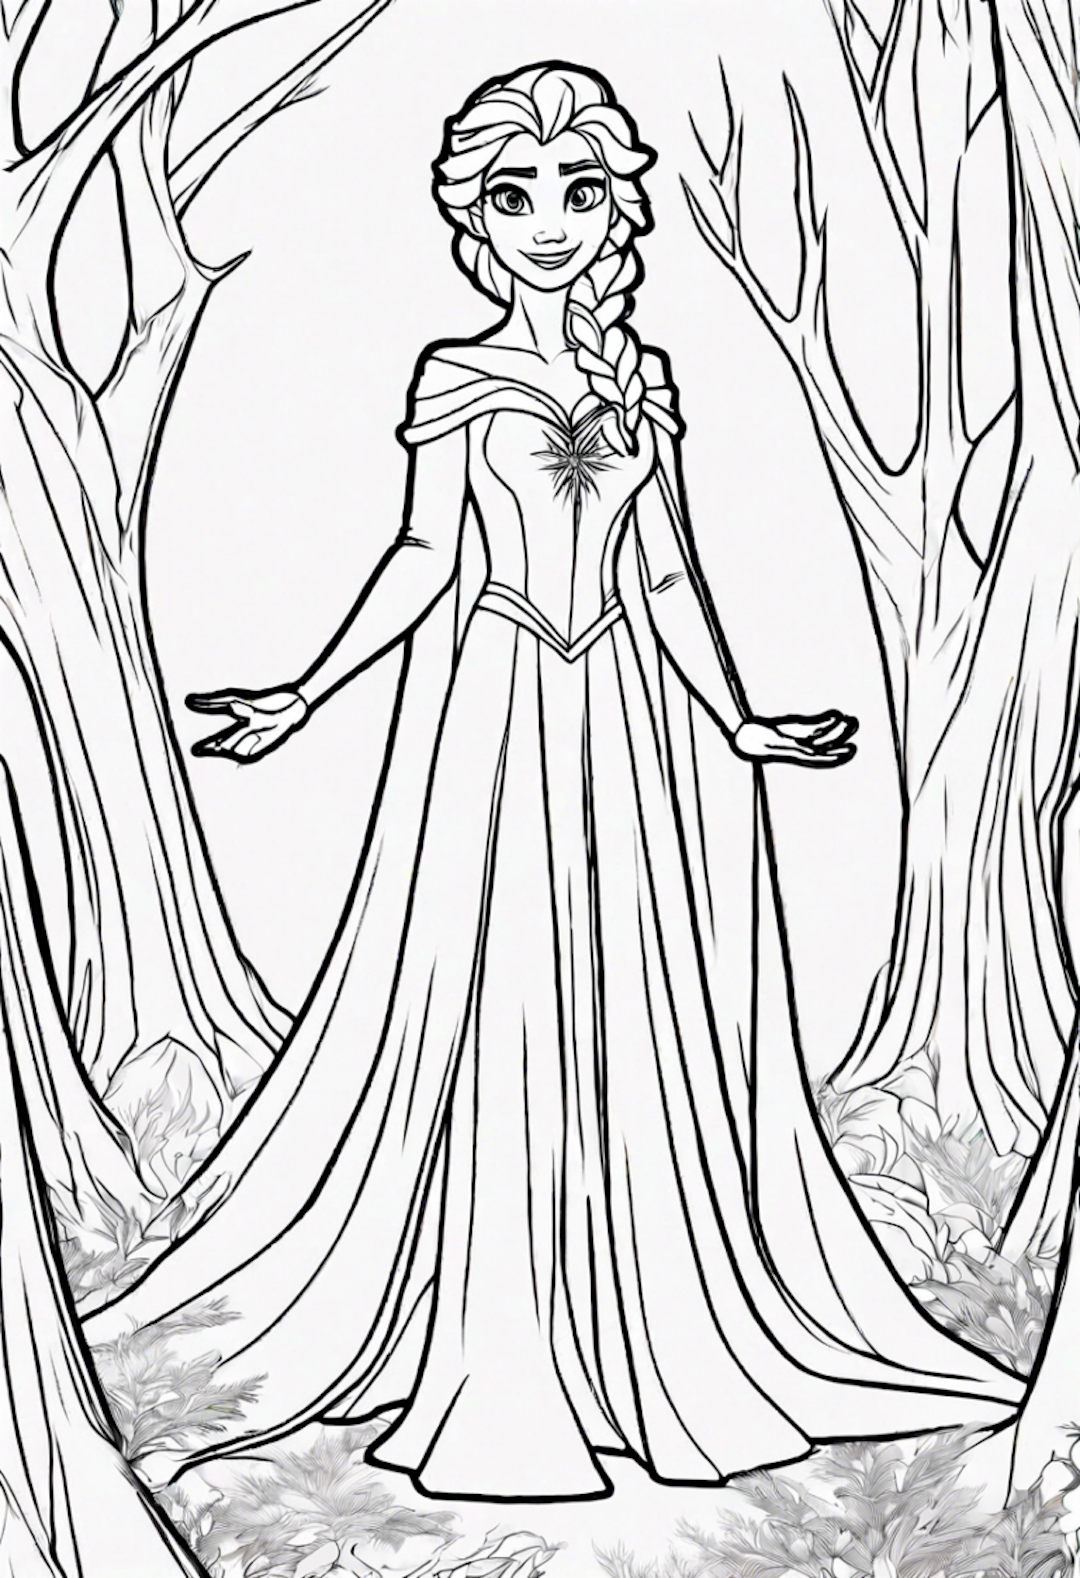 Elsa in the Enchanted Forest Coloring Page coloring pages